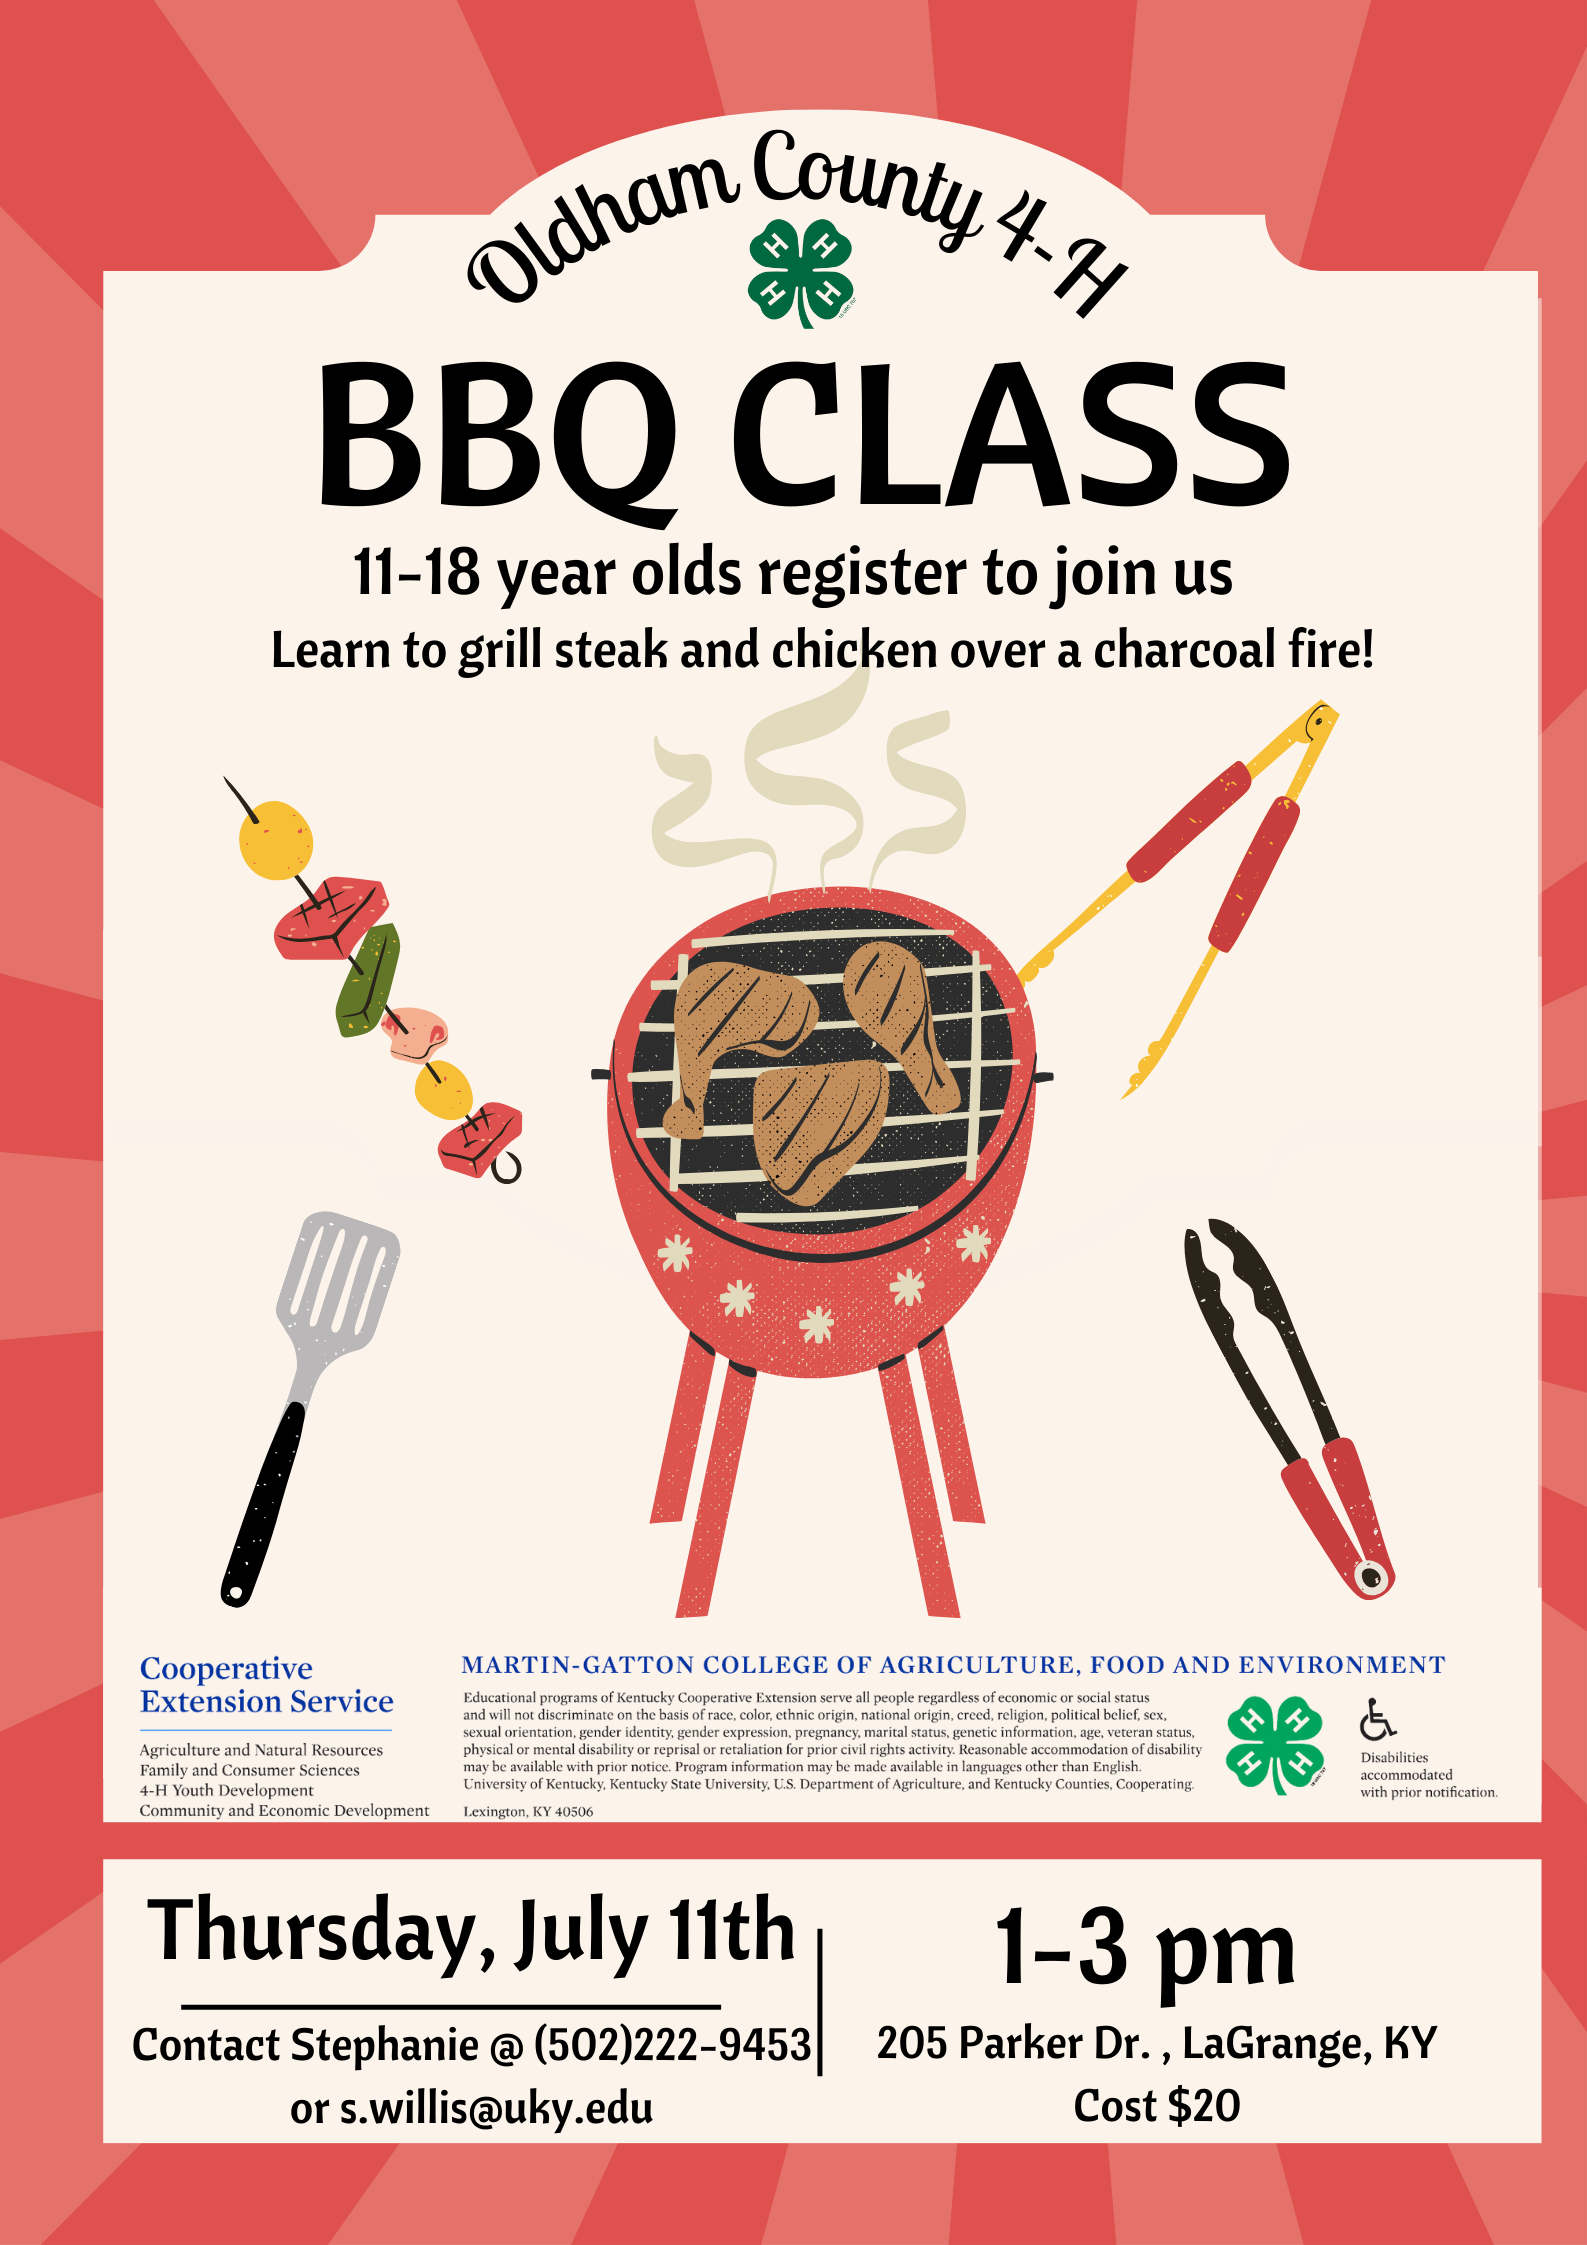 4-H flyer advertising a BBQ class with image of grilling meat